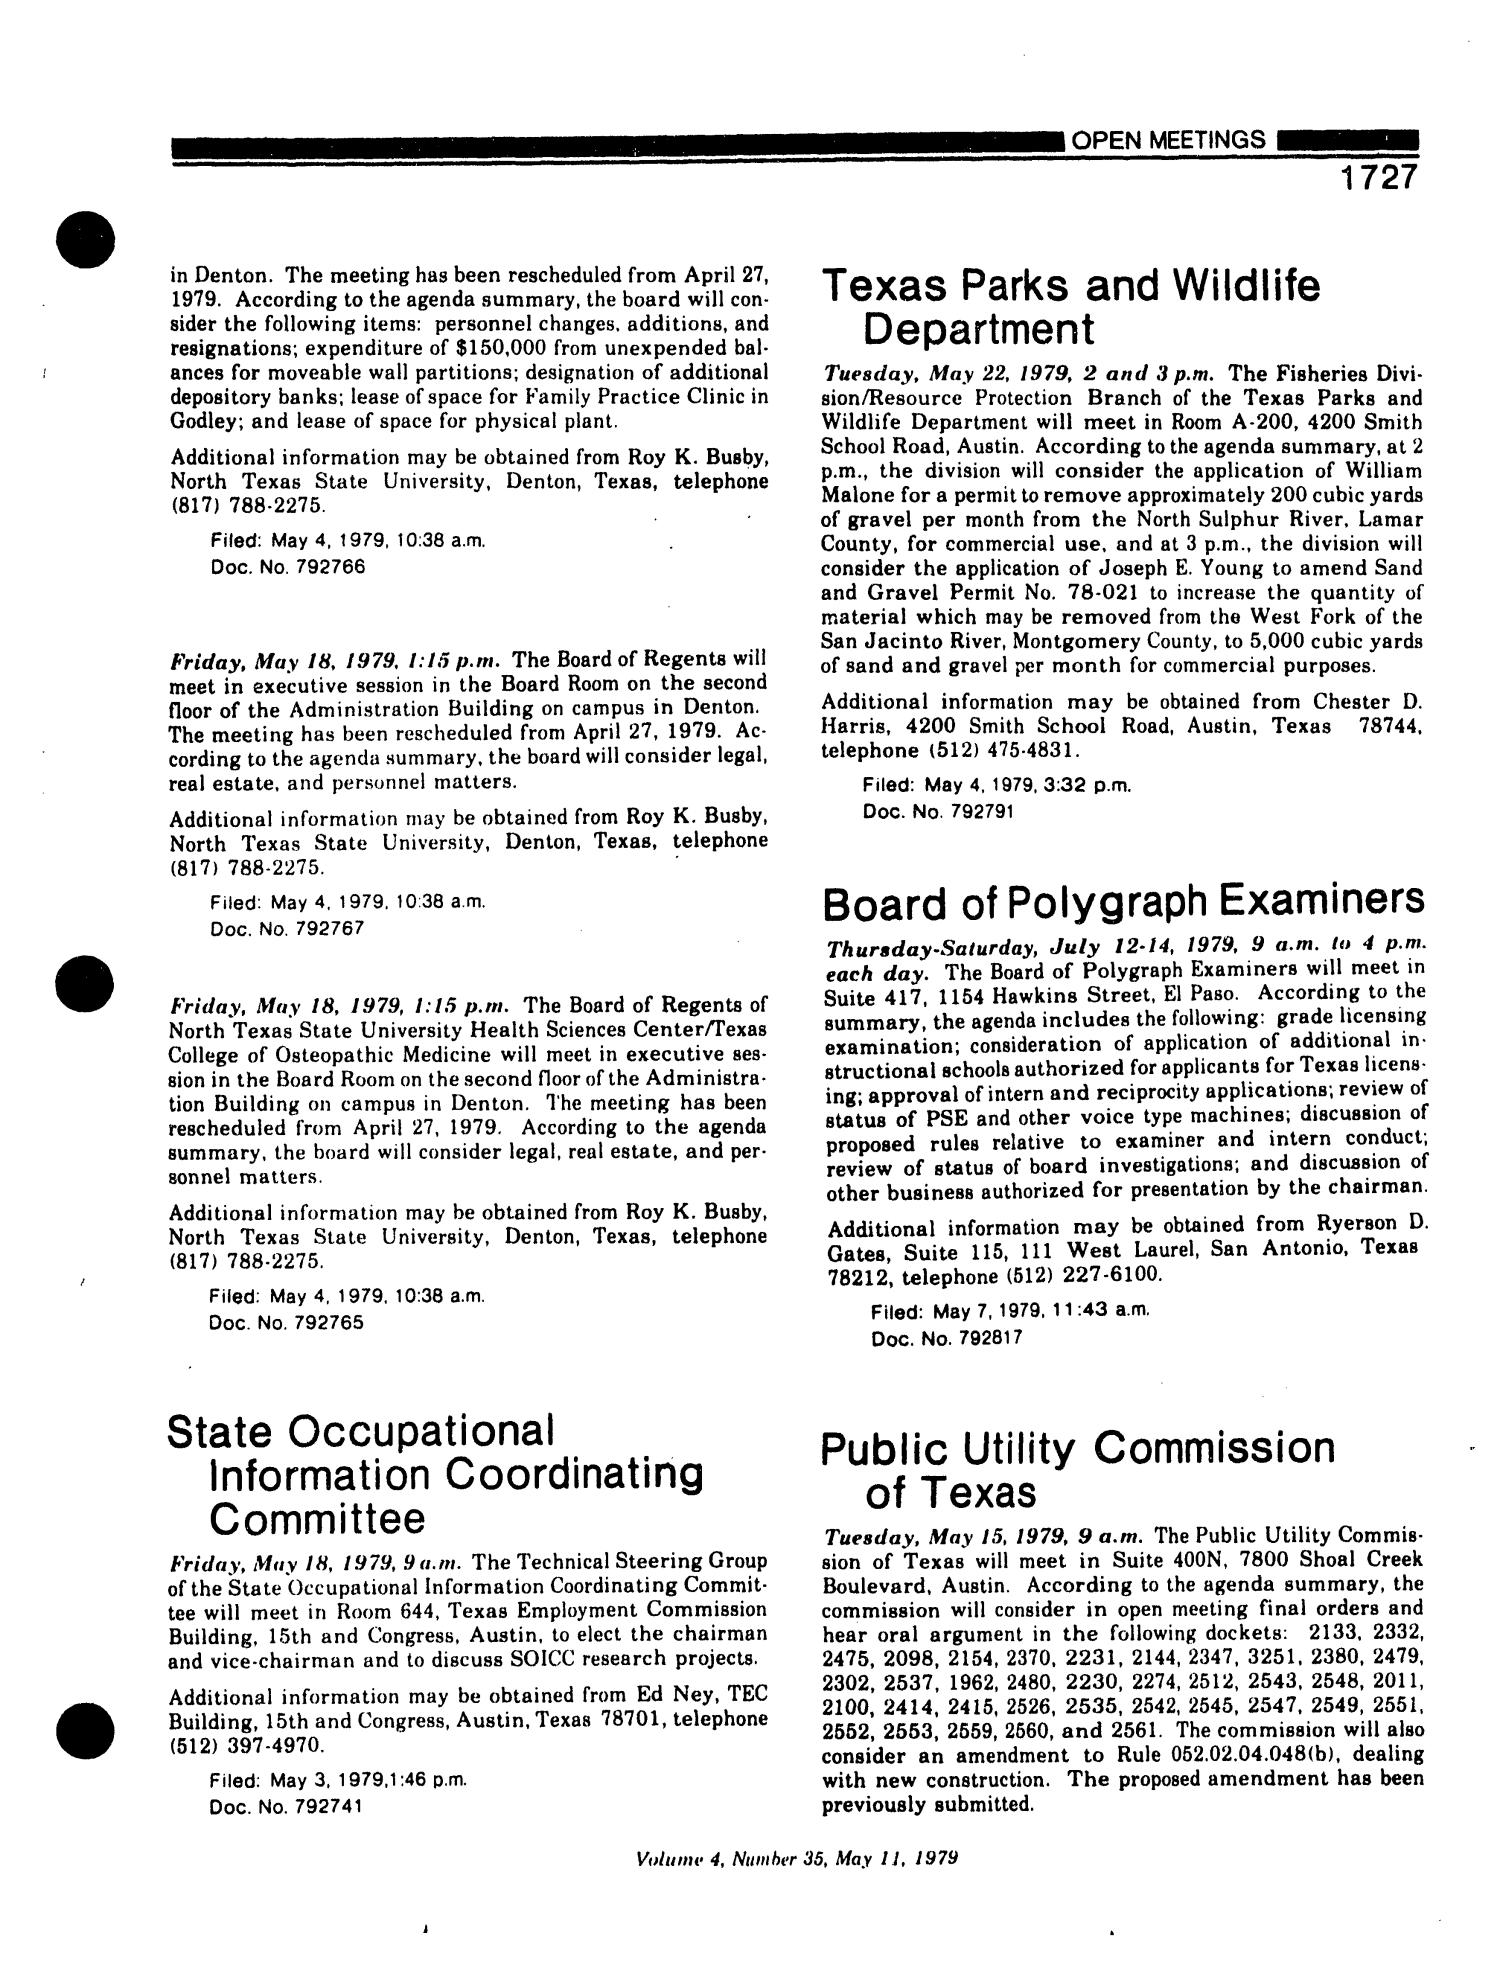 Texas Register, Volume 4, Number 35, Pages 1703-1756, May 11, 1979
                                                
                                                    1727
                                                